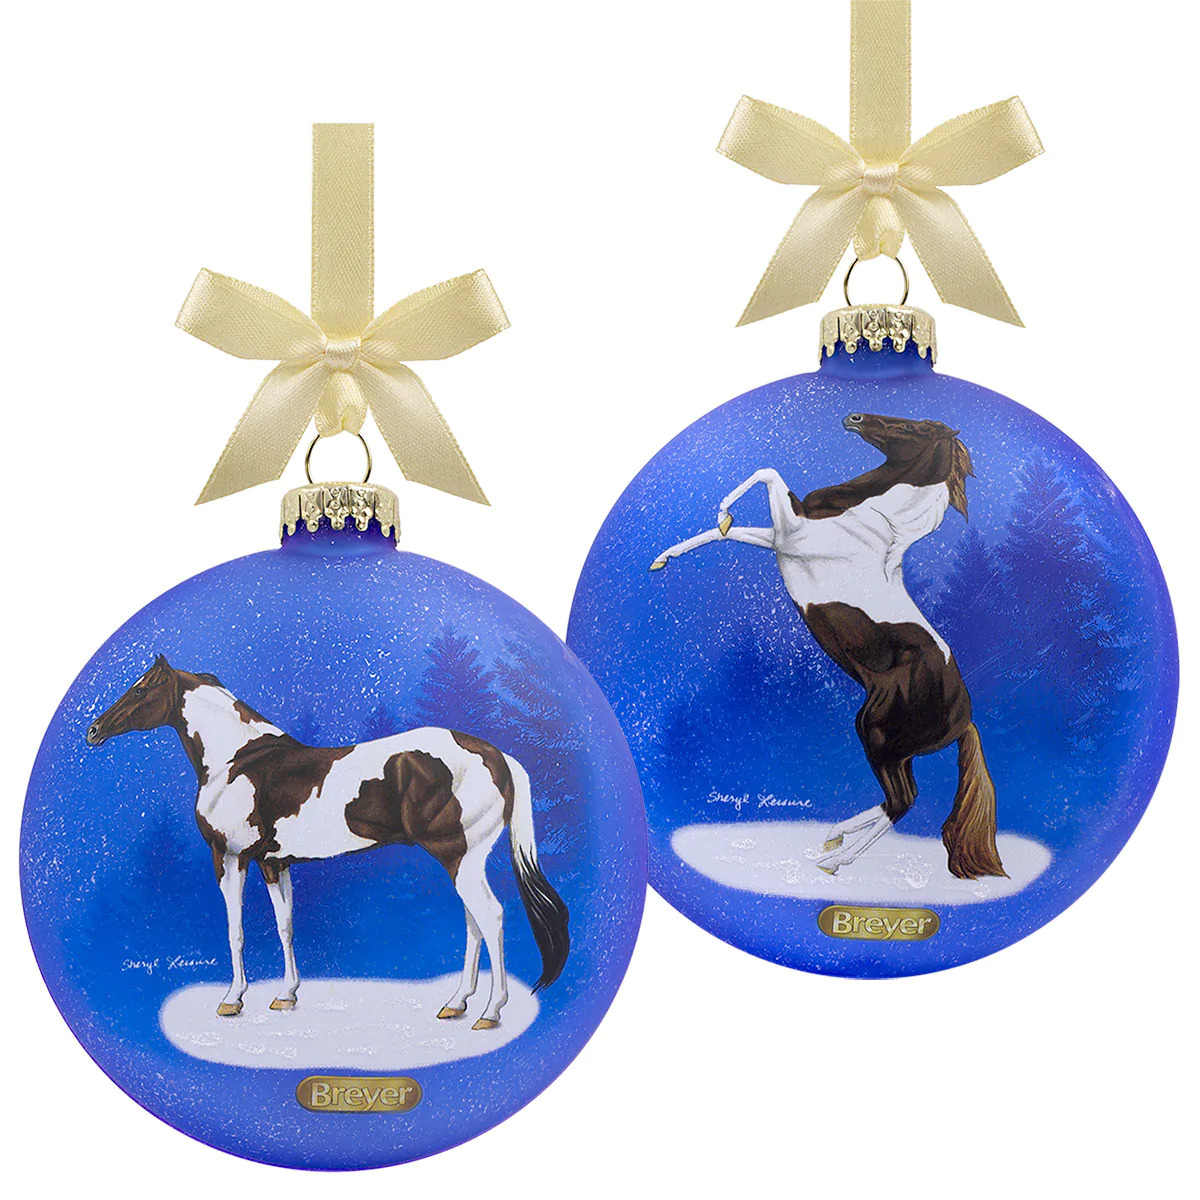 #700826 Artist Signature Glass Ornament Paint Pinto Horse Christmas Holiday Horse Ornament 2022 Sheryl Leisure